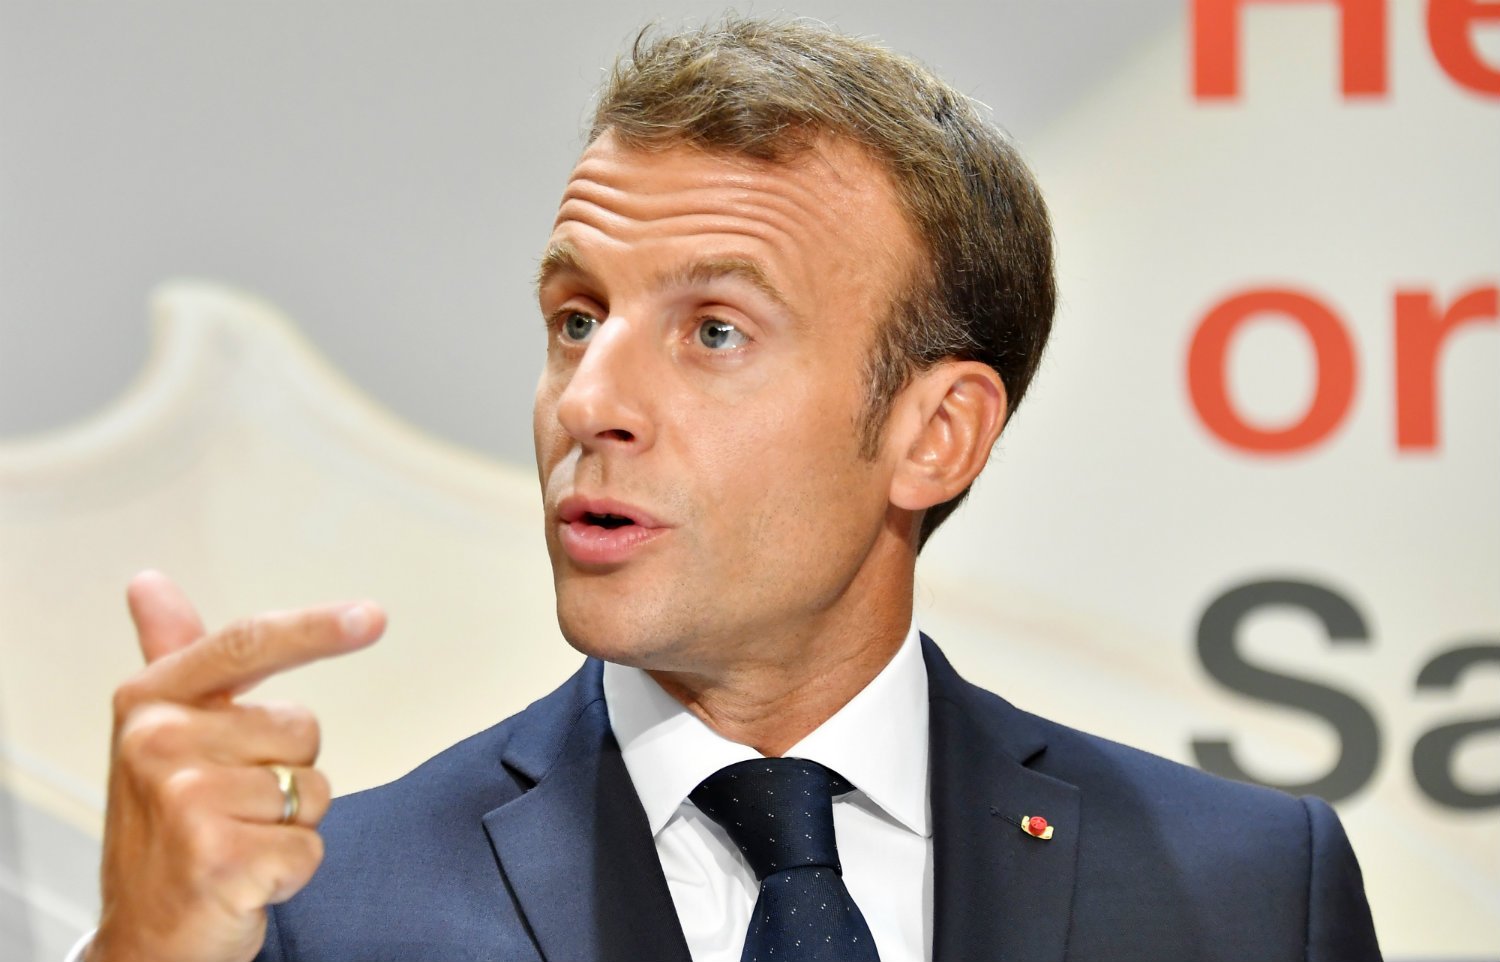 Free fall: Macron's popularity at record low